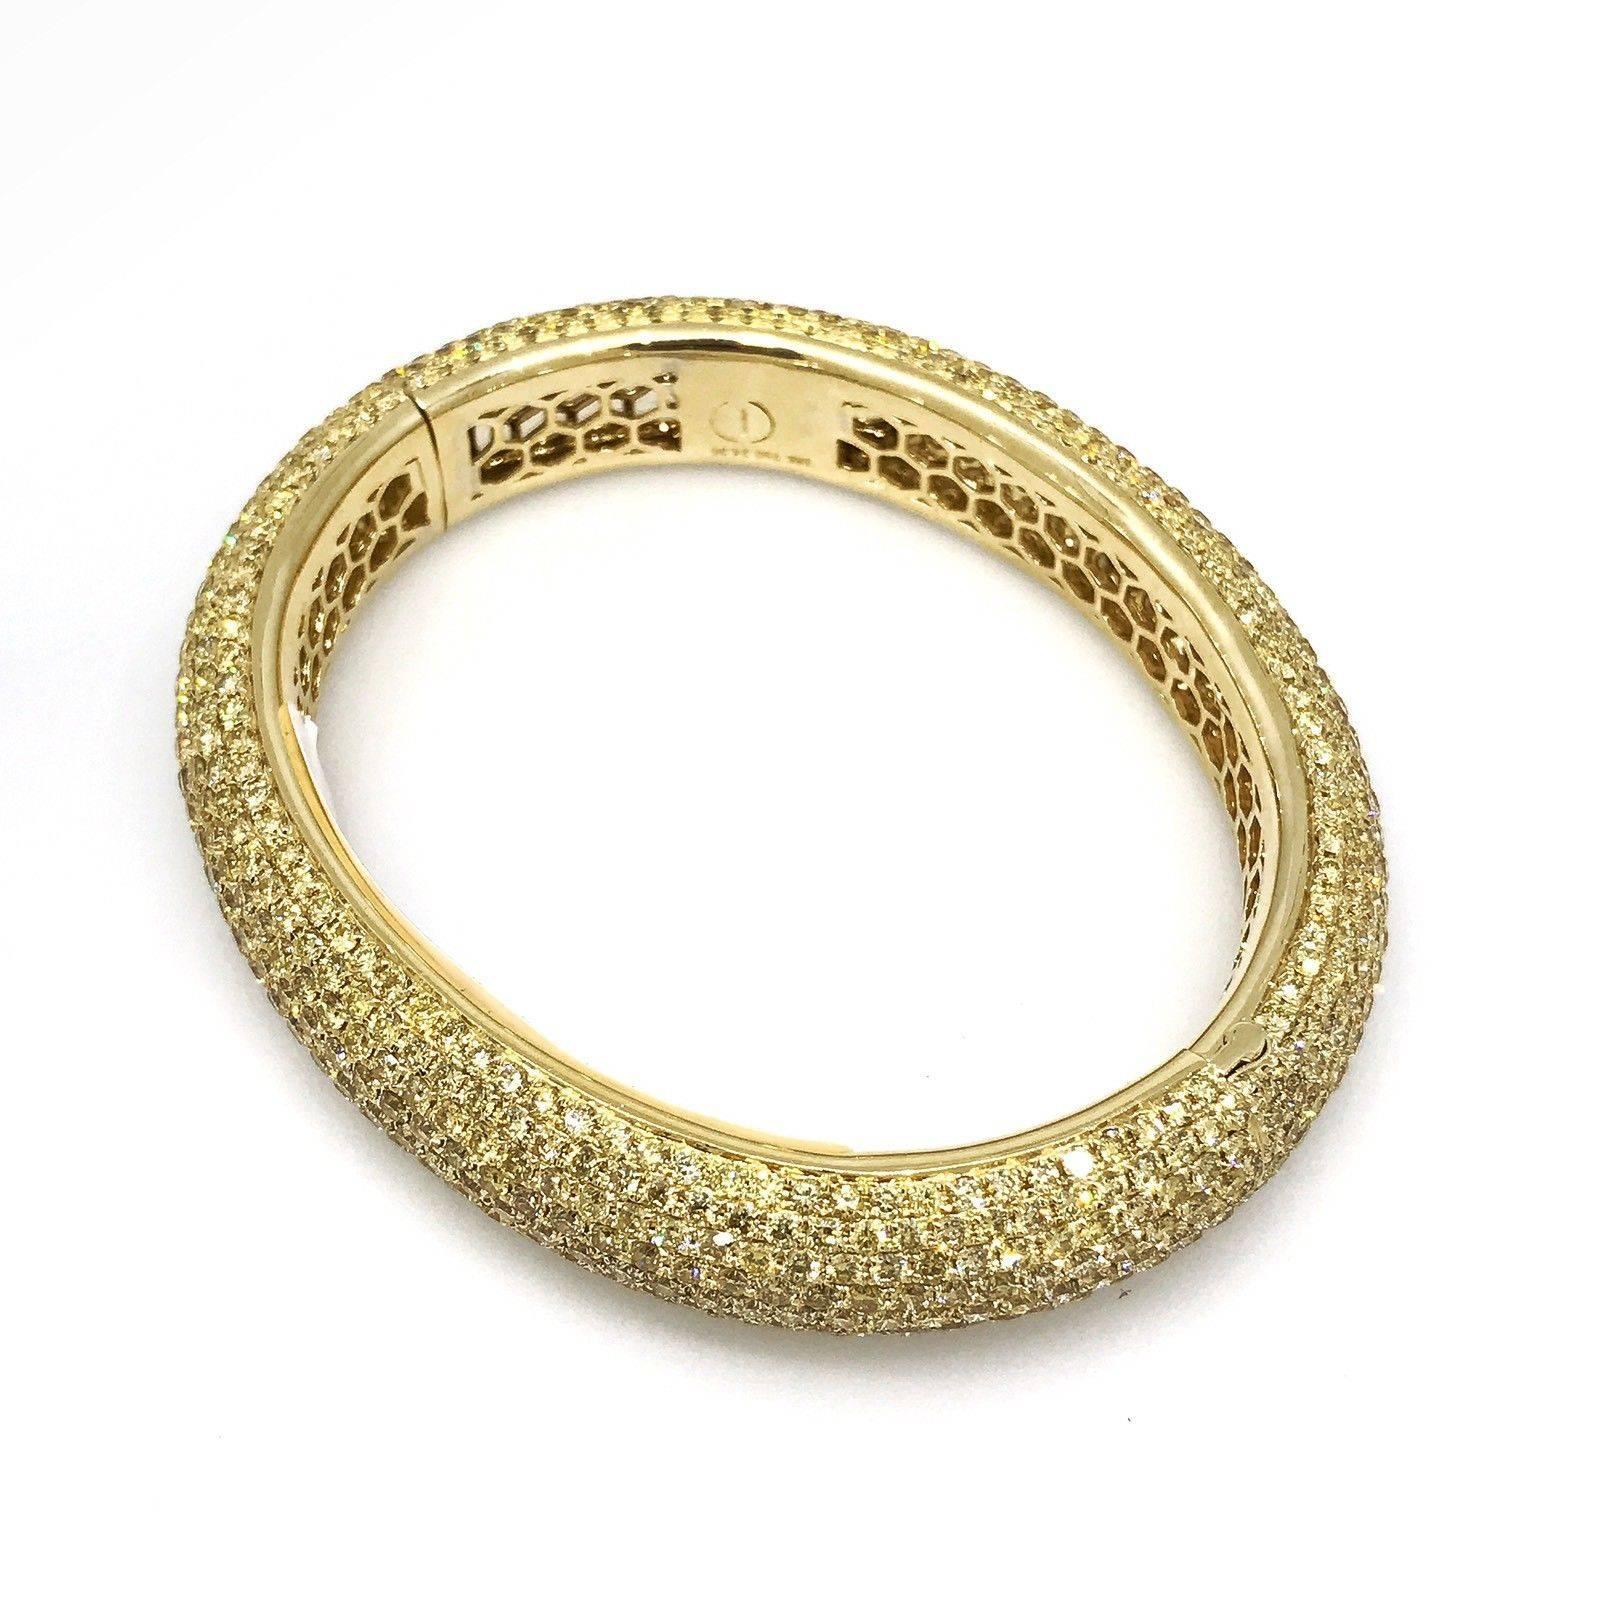 Fine quality, oval shaped wide band bangle bracelet, featuring 24.36 carats total weight of Round brilliant cut yellow diamonds, VS dlarity.  Diamonds are pave set around entire bangle in 18k high-polished yellow gold.  Bangle has an easy twisted